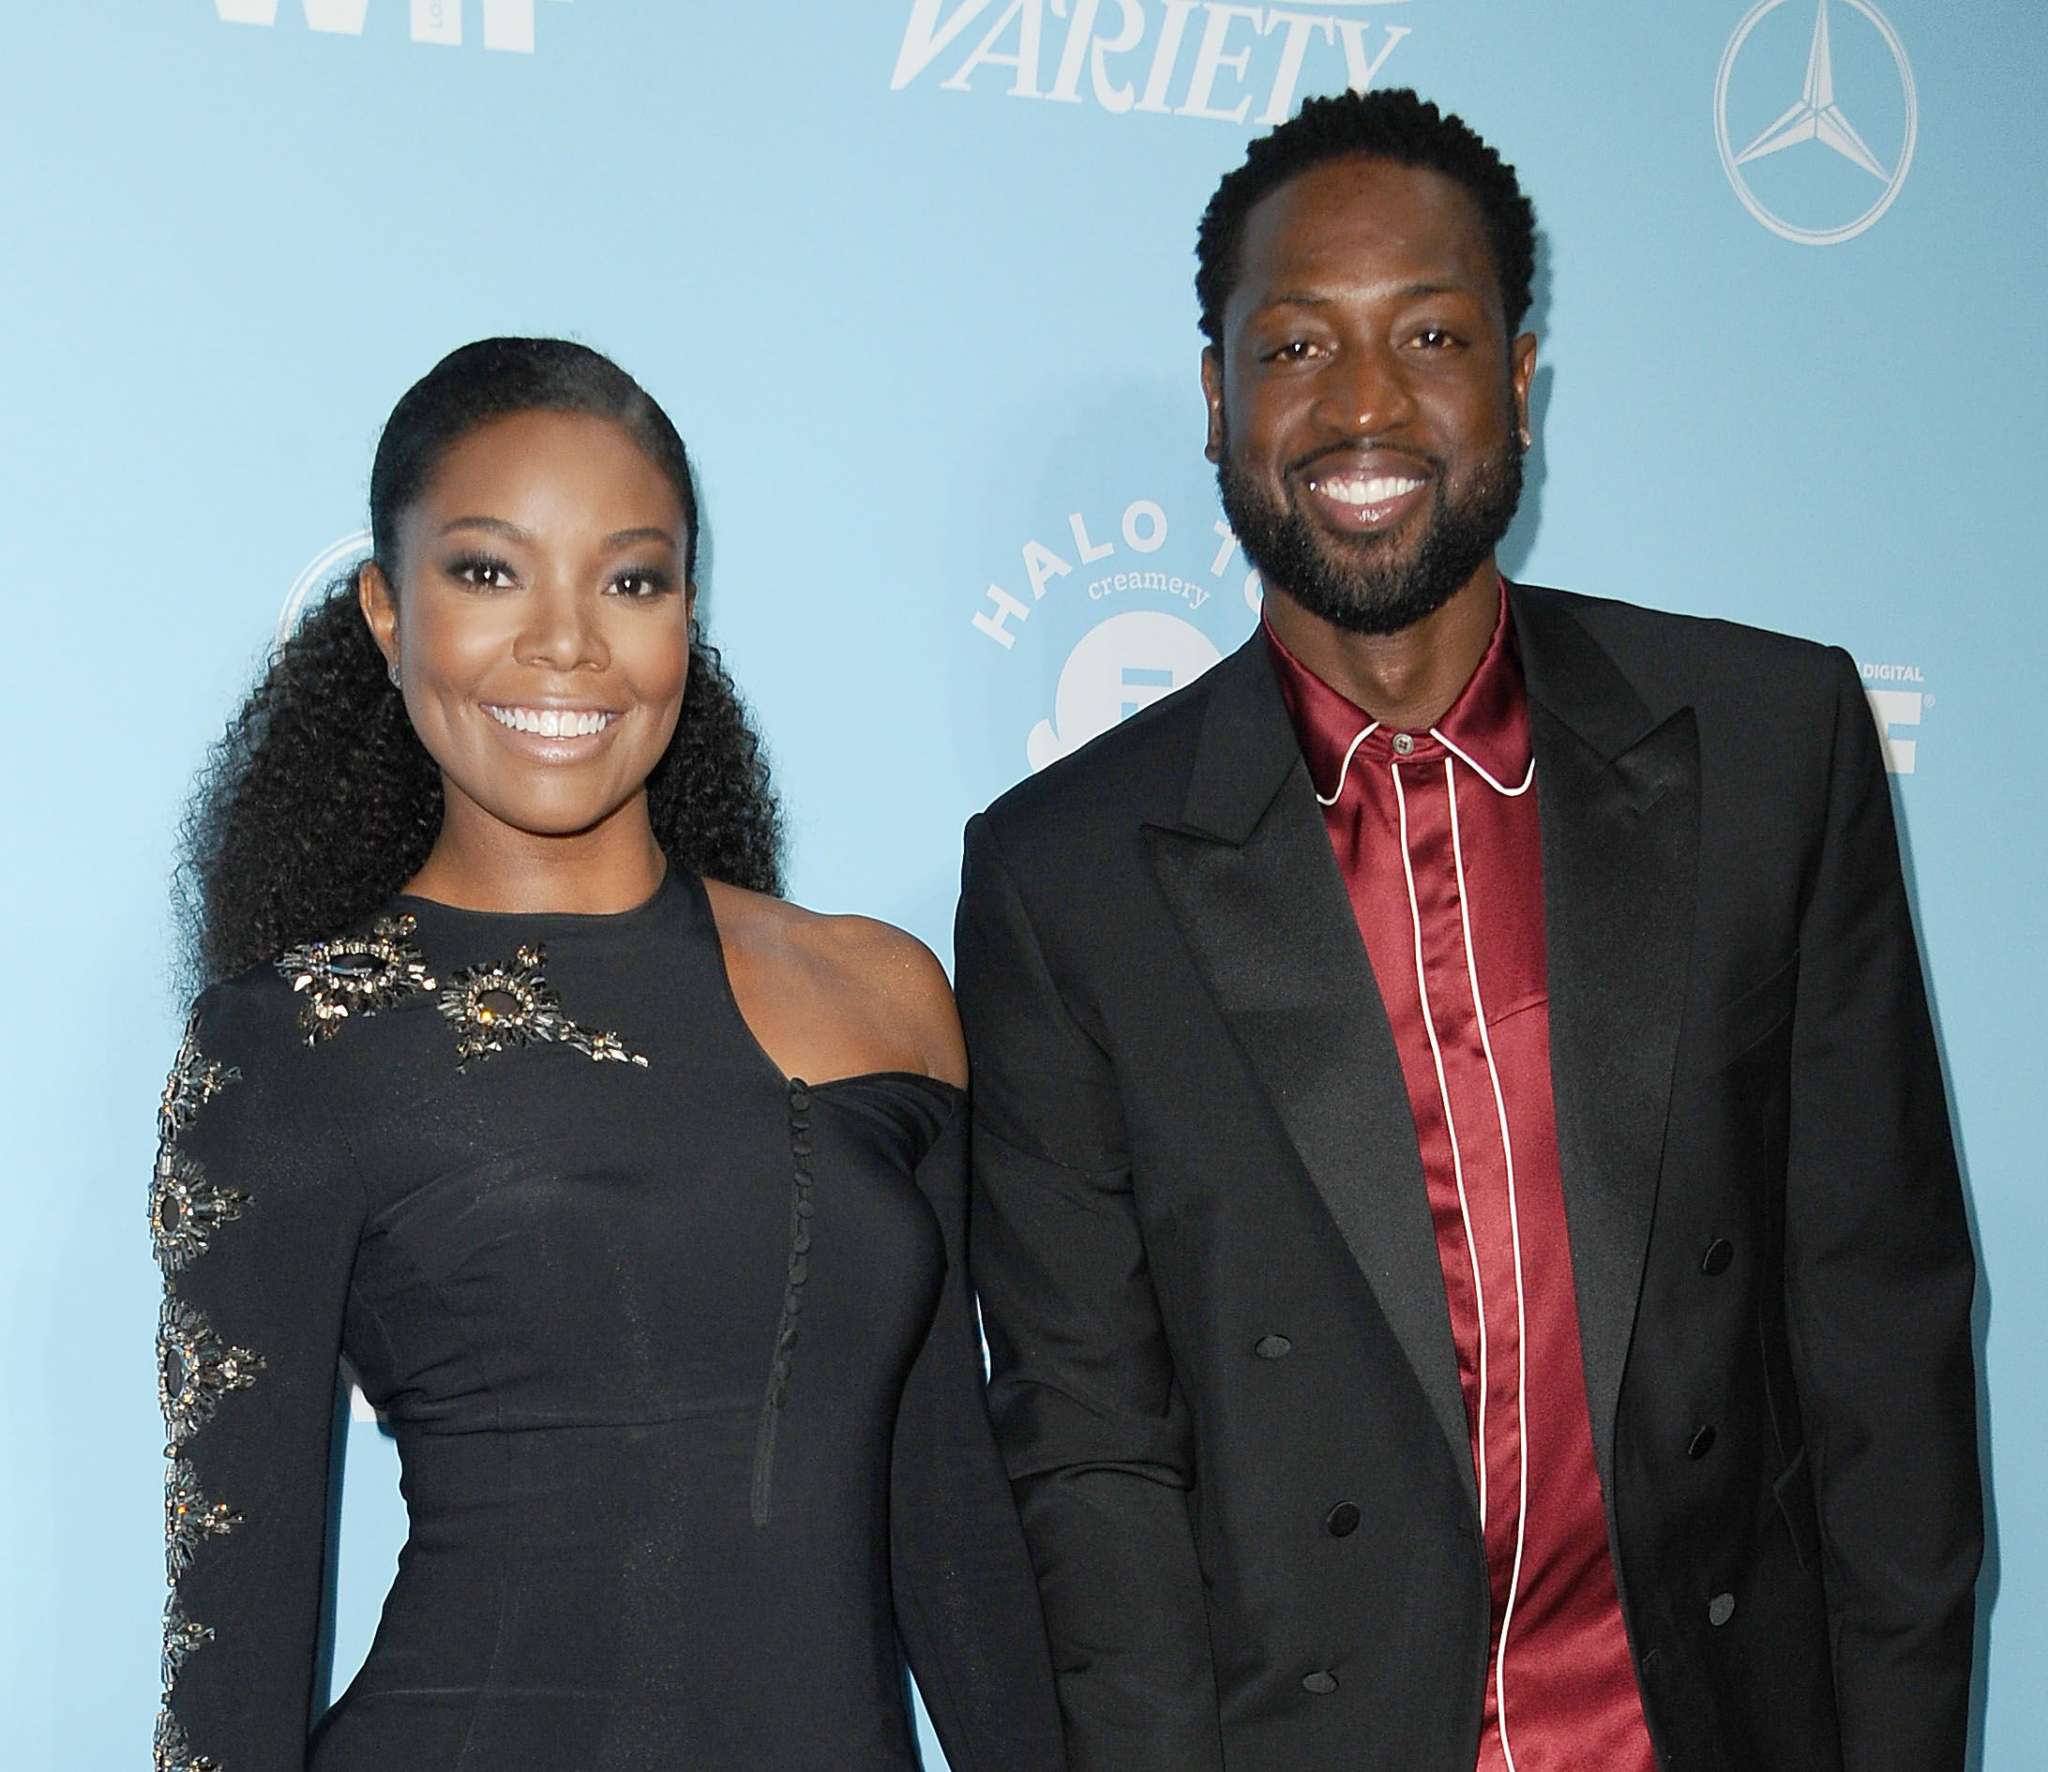 ”gabrielle-union-and-dwyane-wade-are-flaunting-their-love-on-social-media”